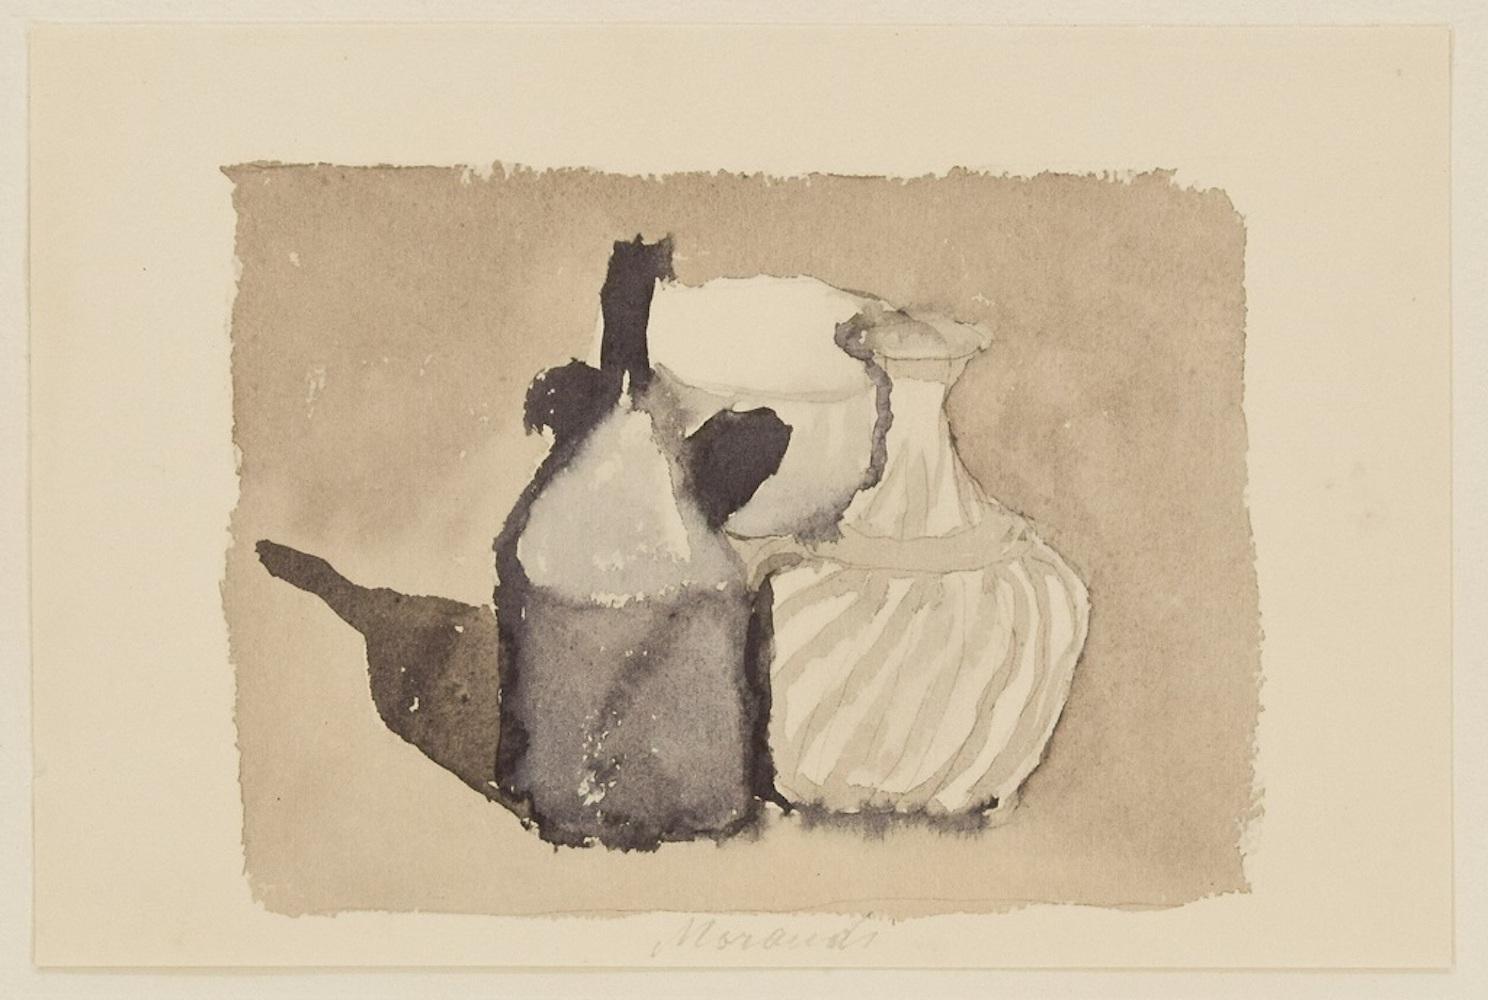 Image dimensions: 15.7 x 23.8  cm.

Still Life is a superb original offset print, reproducing the original watercolor by Giorgio Morandi.

Signature in pencil by the artist is perfectly reproduced on the lower central margin. 

From the volume